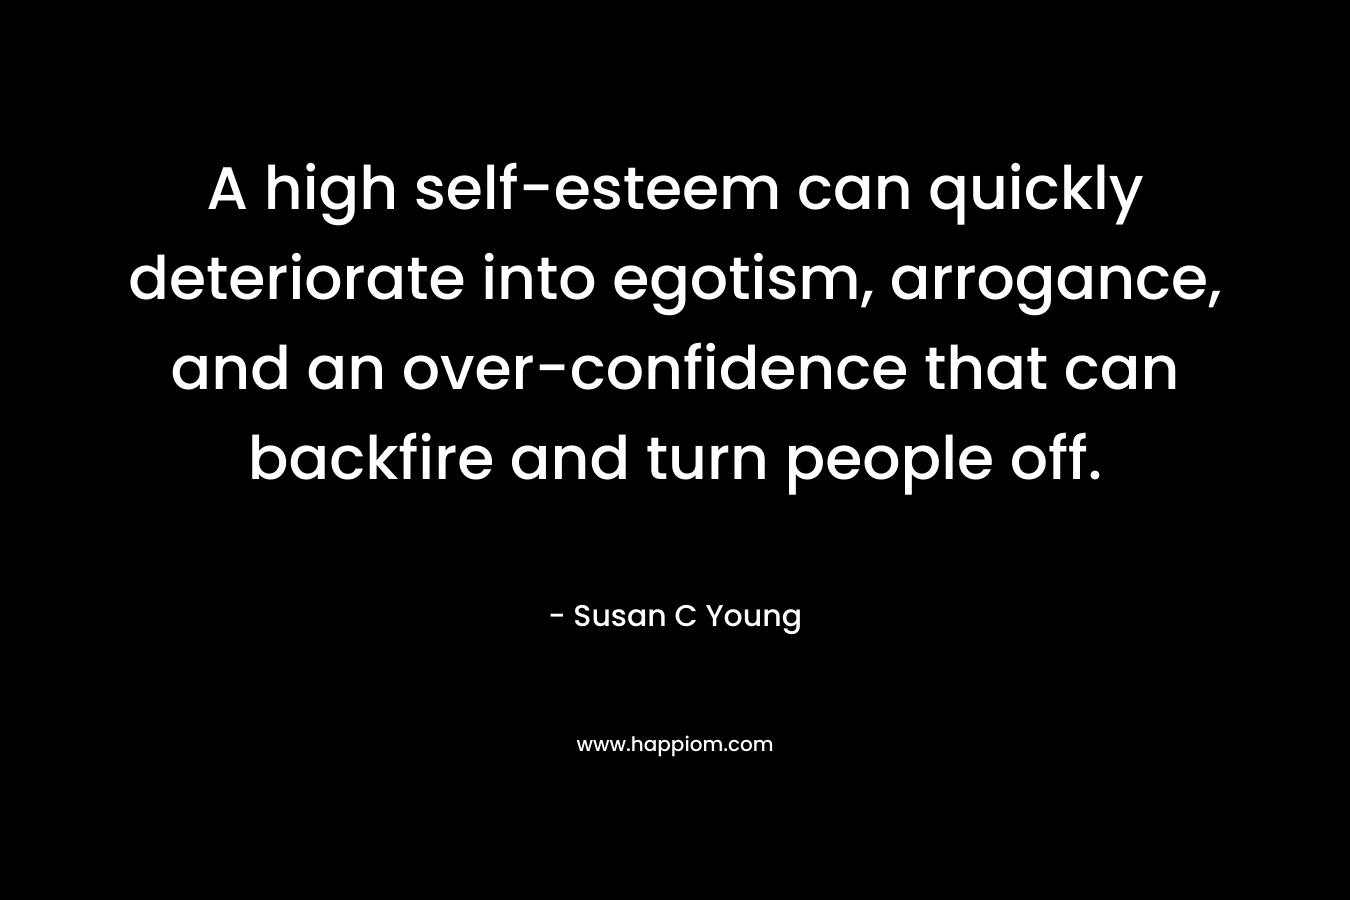 A high self-esteem can quickly deteriorate into egotism, arrogance, and an over-confidence that can backfire and turn people off.